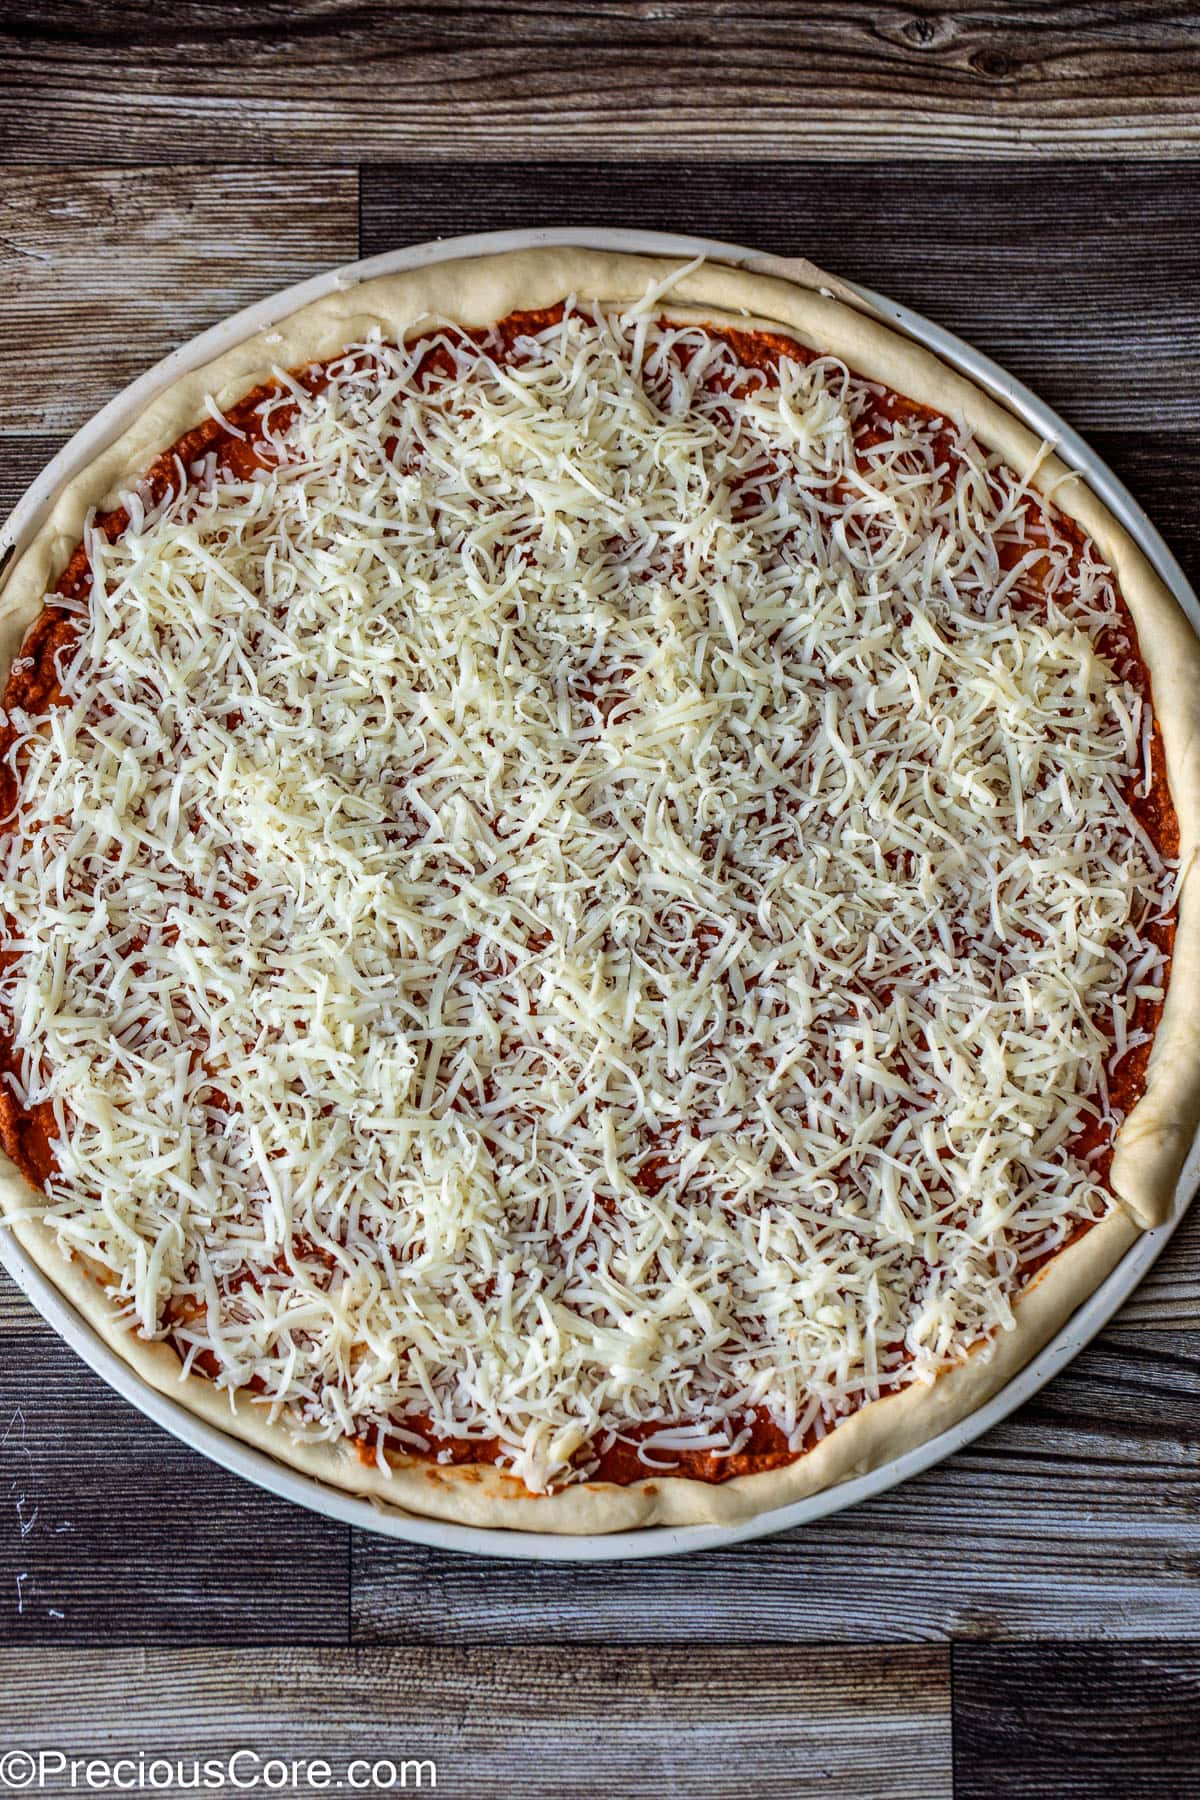 Shredded cheese spread on pizza.